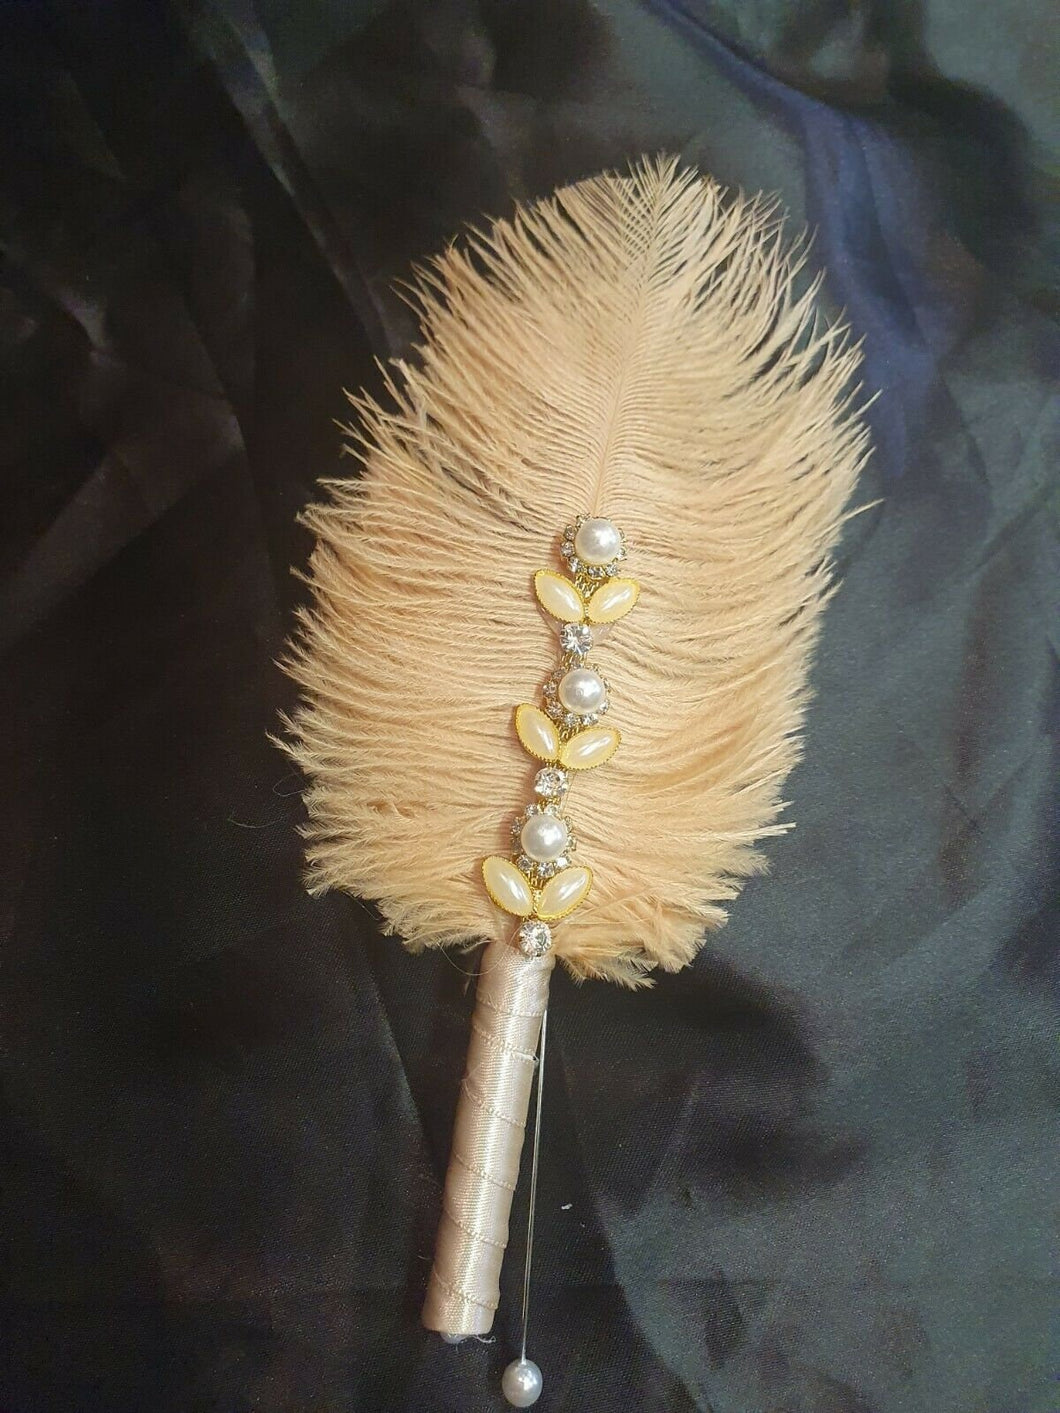 Feather buttonhole Boutonnière, Crystal & pearl   for jacket lapel  Great Gatsby wedding style -ANY COLOUR by Crystal wedding uk